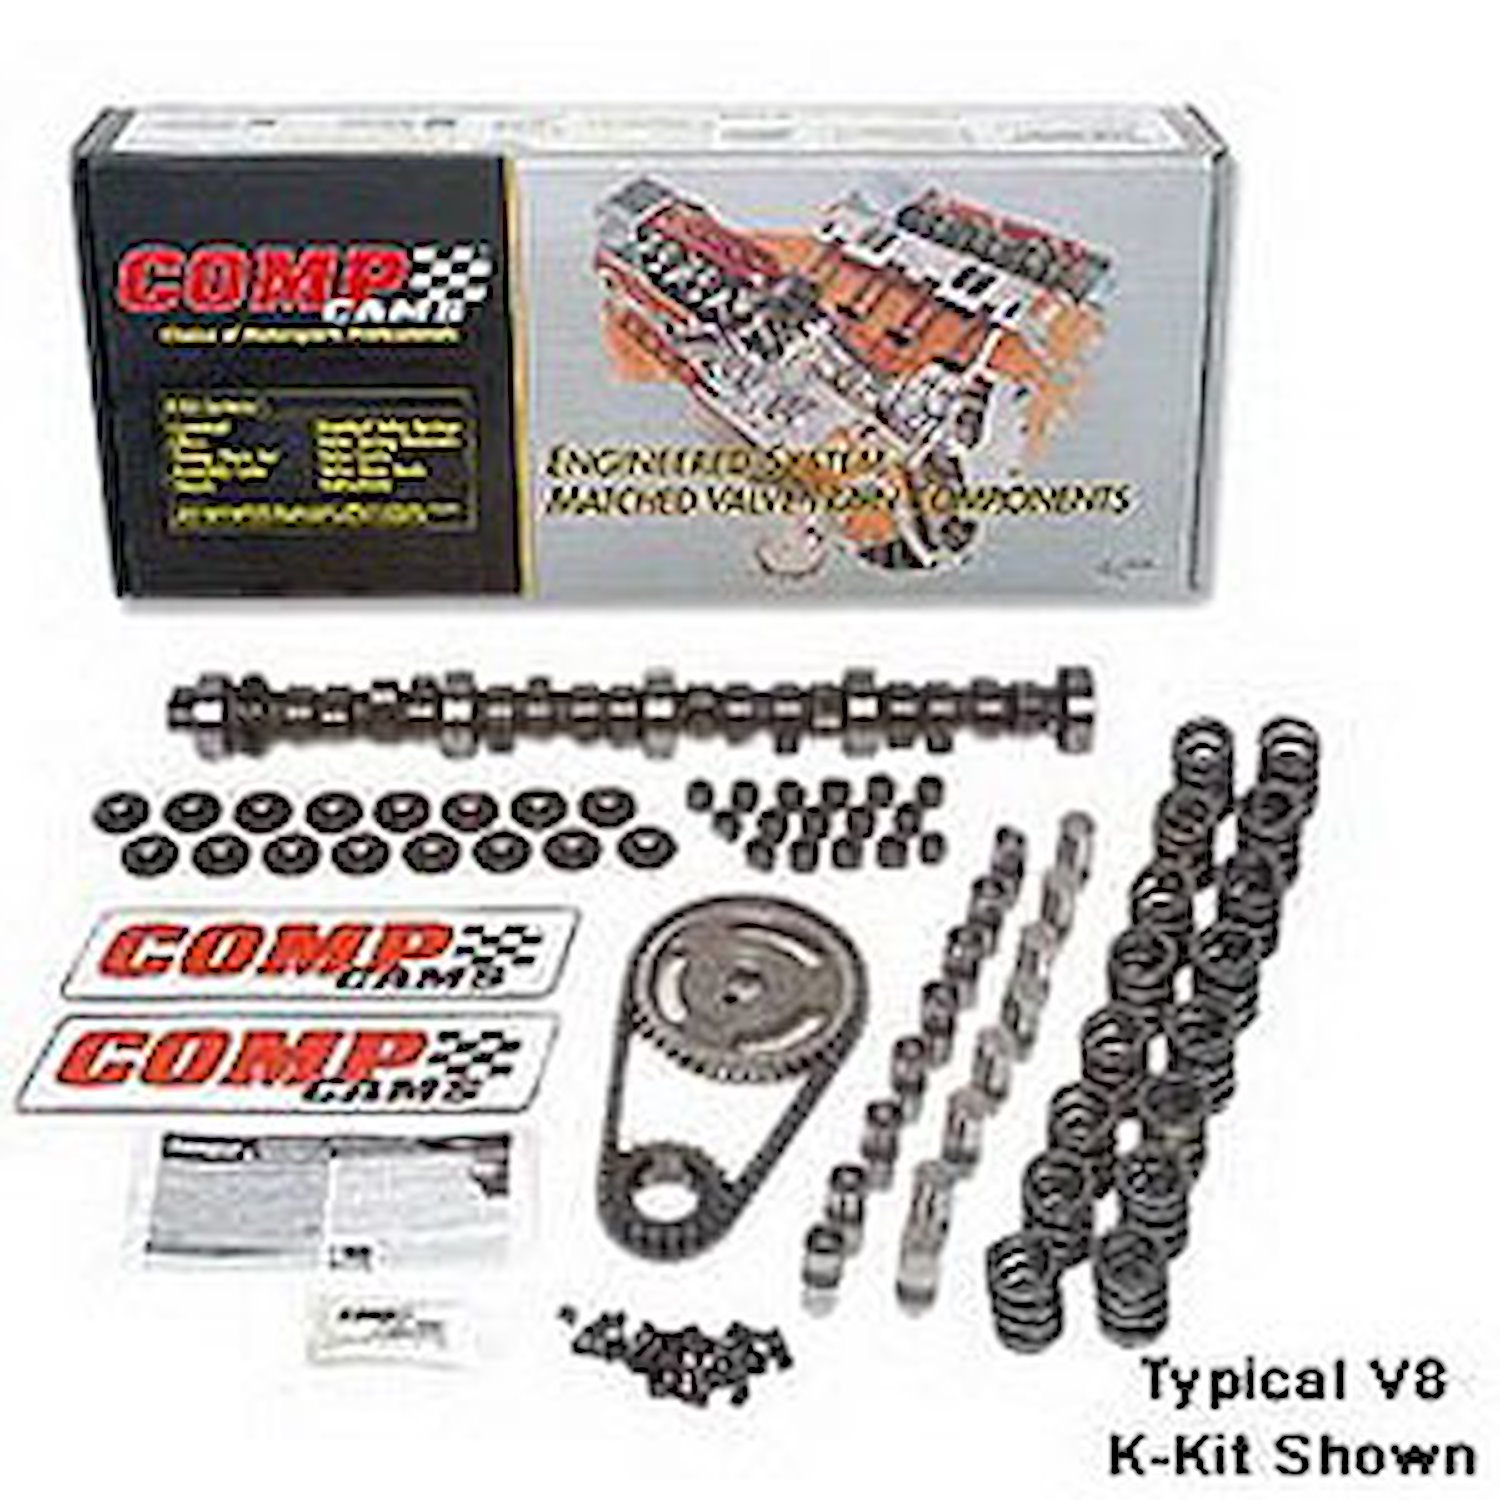 Xtreme Energy 260H Hydraulic Flat Tappet Camshaft Complete Kit Lift .444"/.444" Duration 260/260 RPM Range 1000-5000